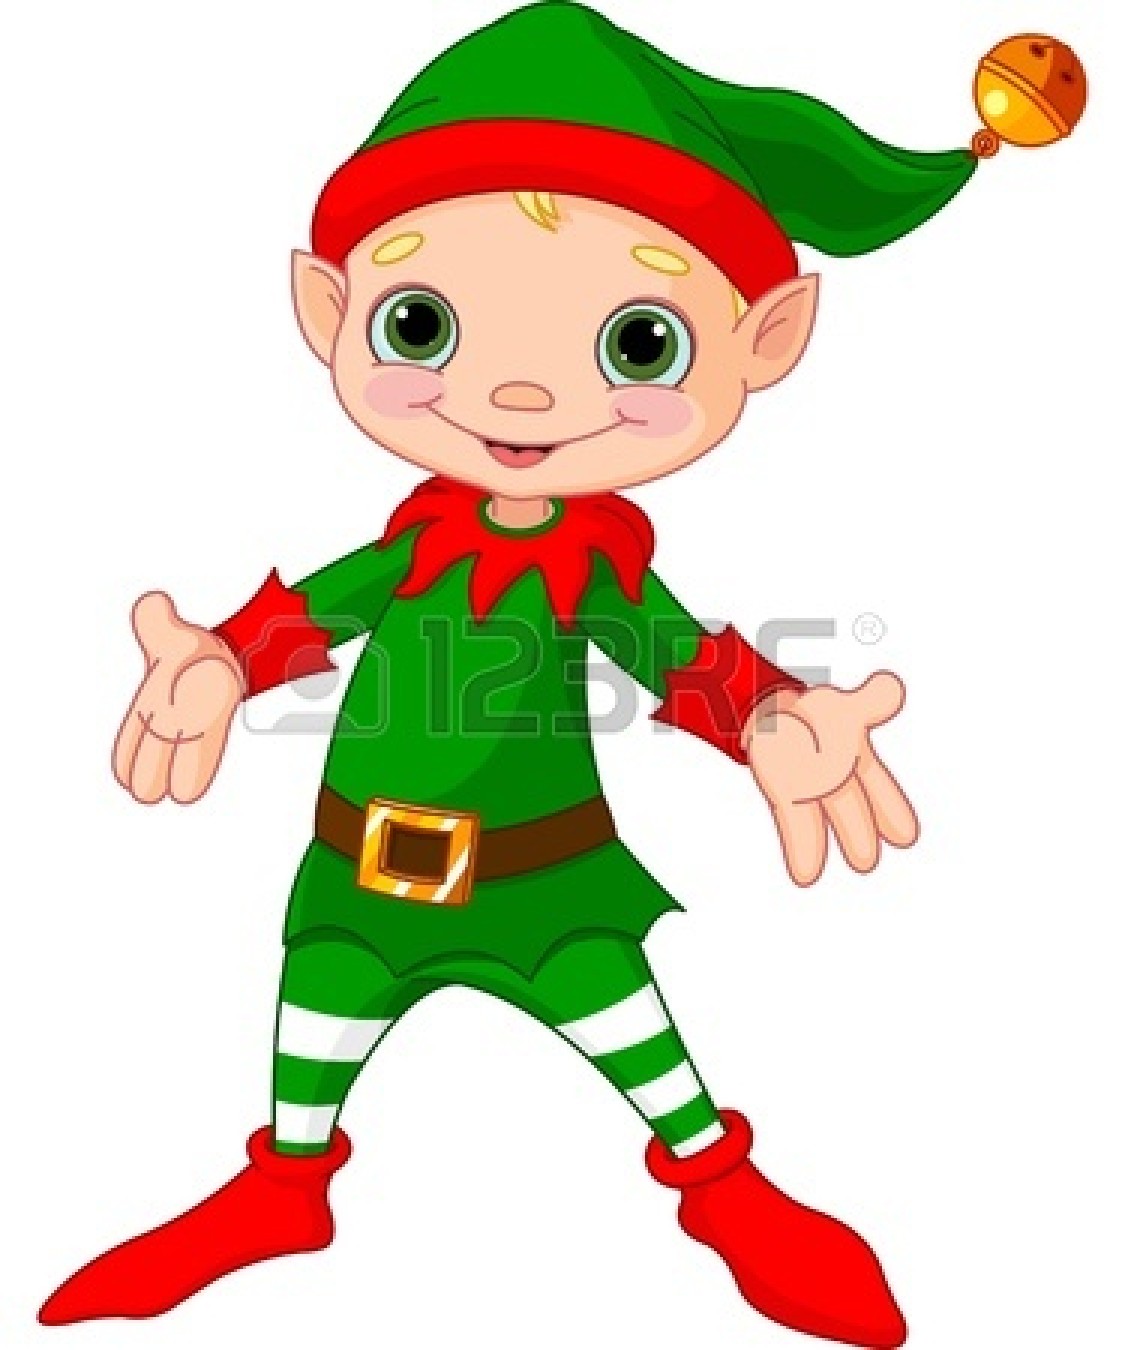 Elf Clip Art Free Borders | Clipart library - Free Clipart Images